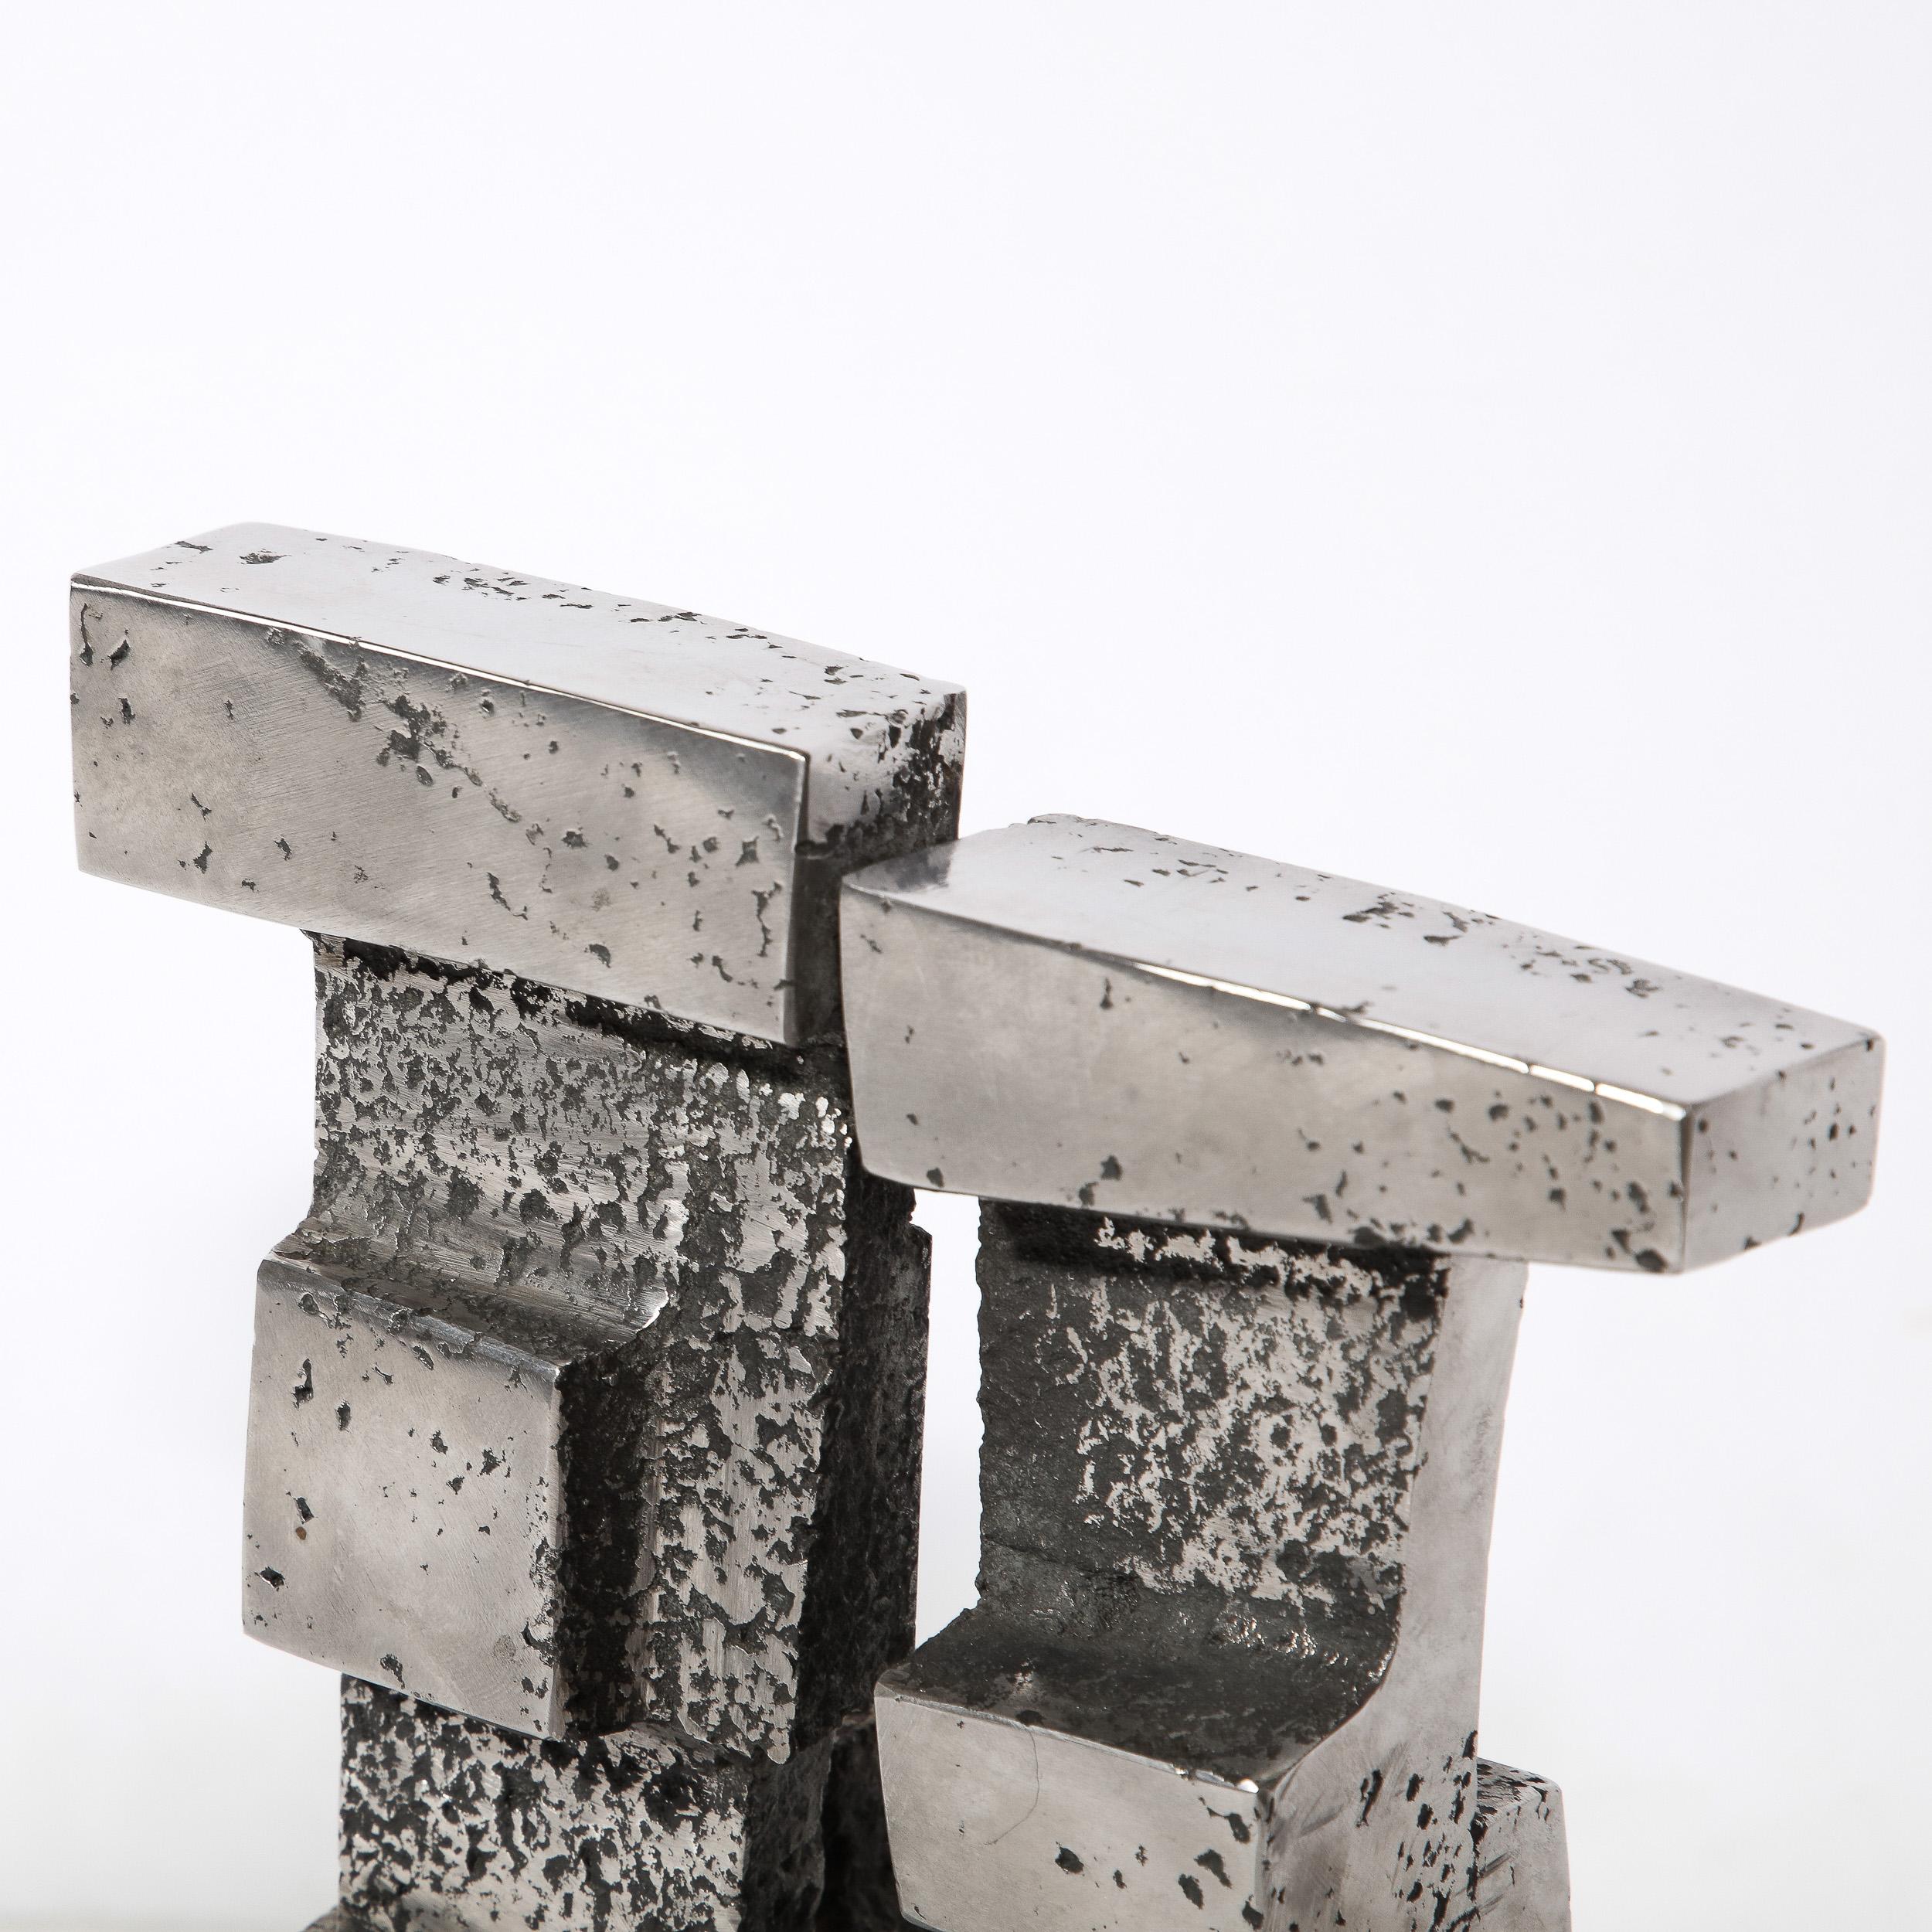 Brutalist Modernist Geometric Sculpture in Caste Stainless Signed Paul Mount  For Sale 4